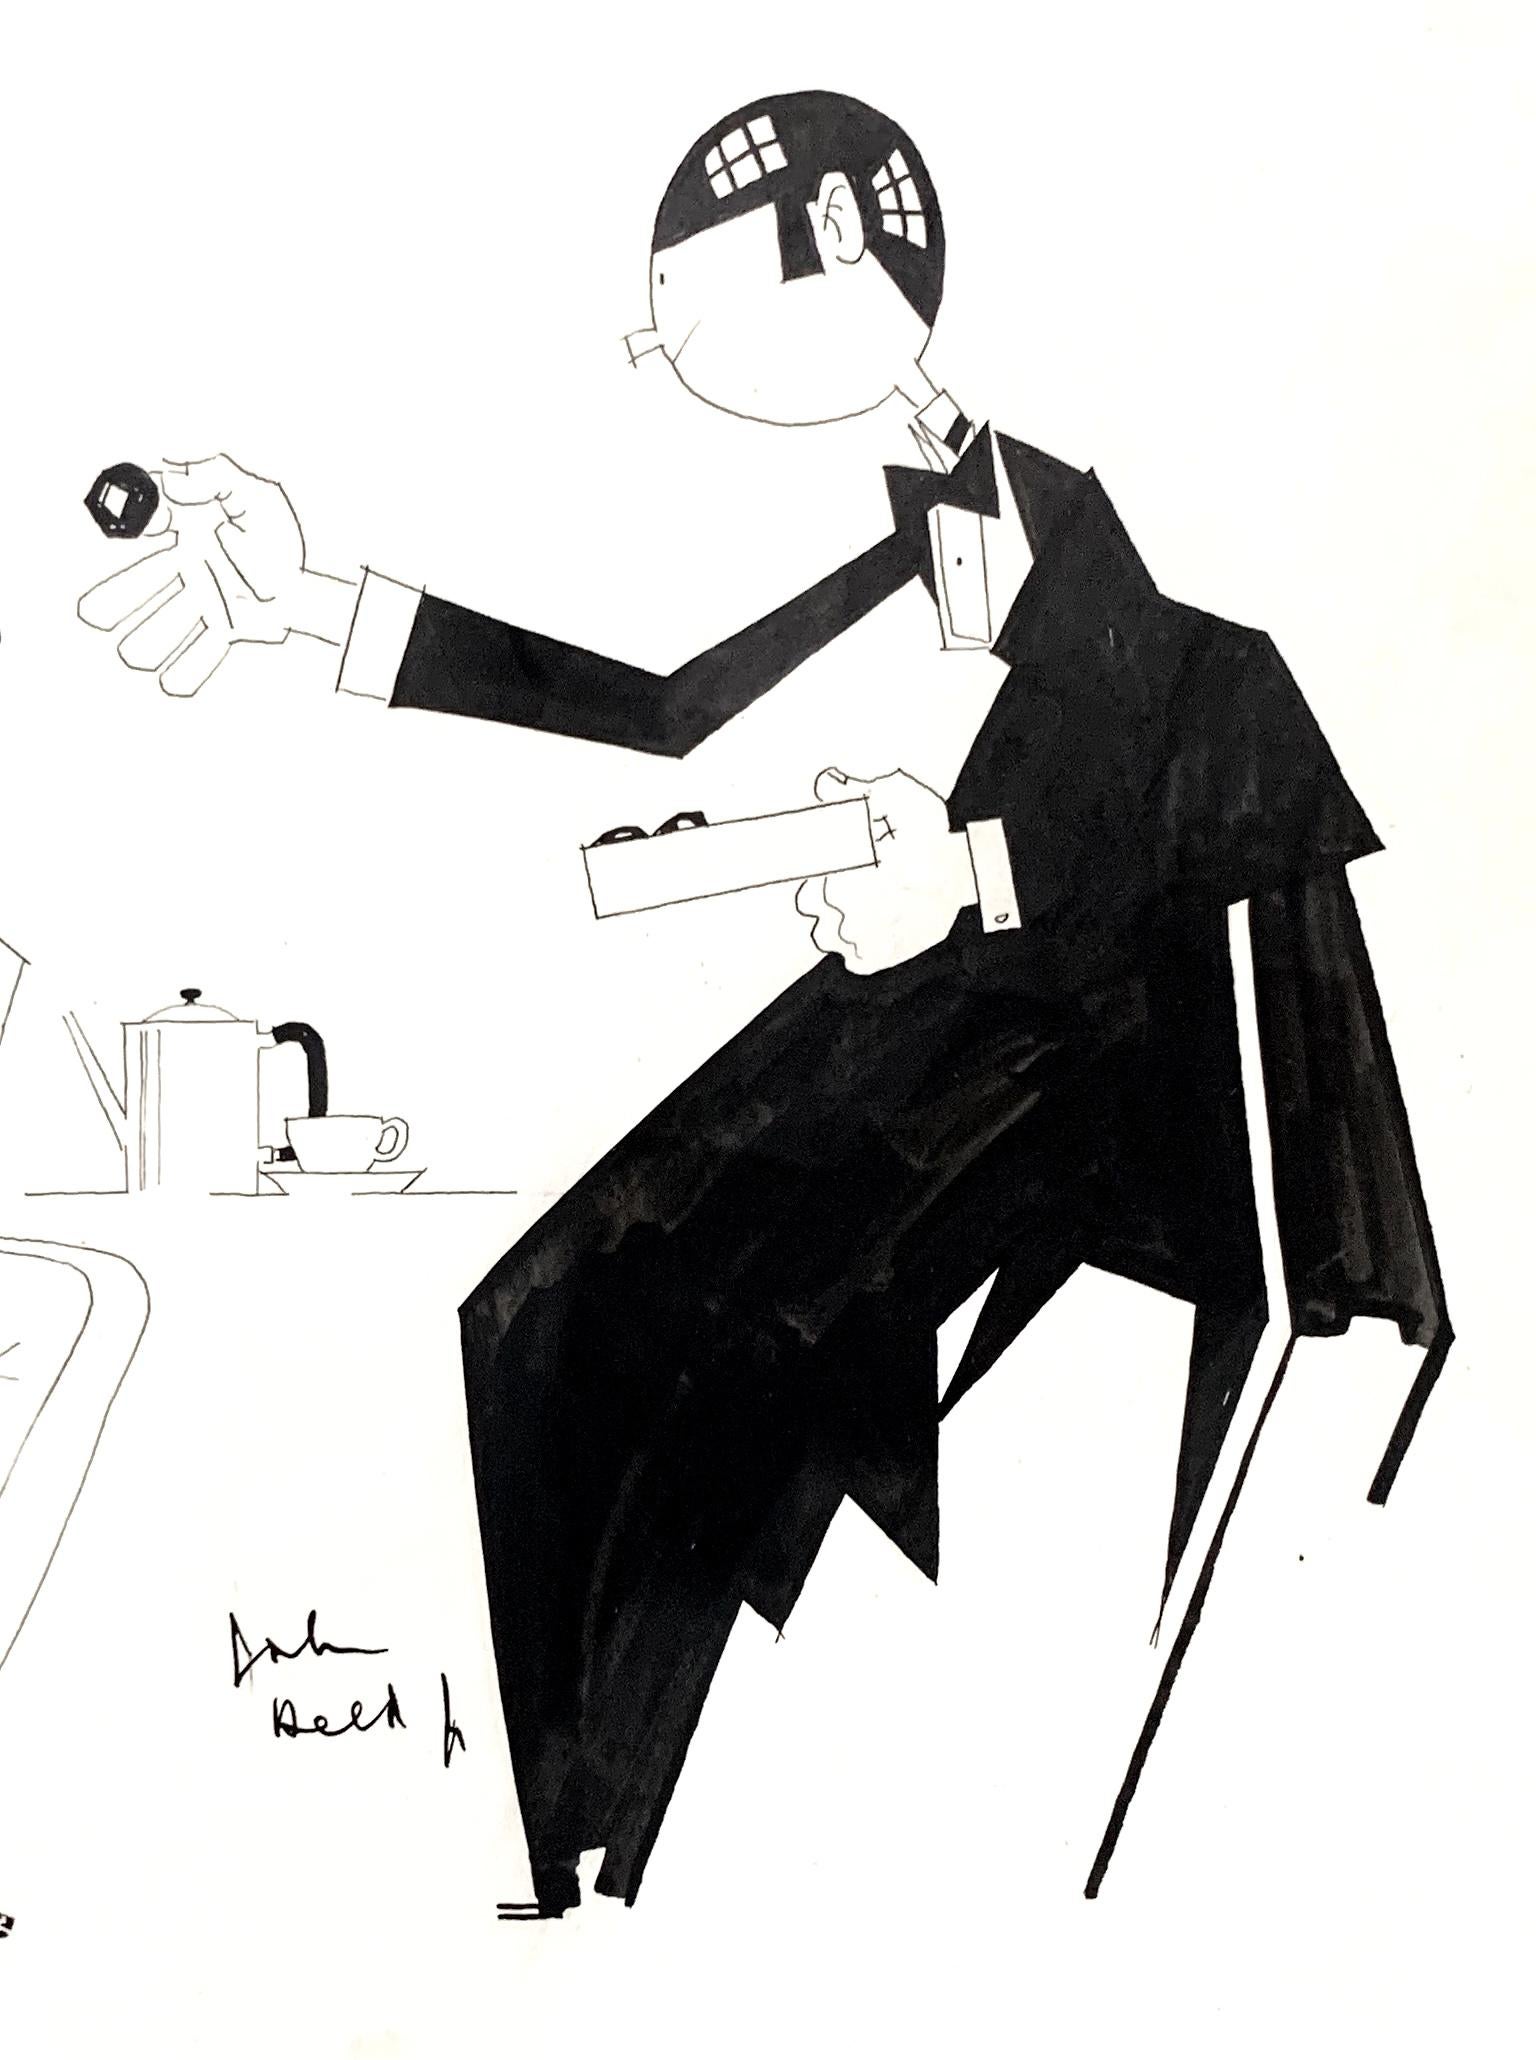 This original, signed drawing by John Held, Jr. -- whose artistry helped to define the Jazz Age and enliven the pages of America's most sophisticated magazines -- depicts a tuxedoed gentleman feeding a chocolate to a blindfolded flapper, all with